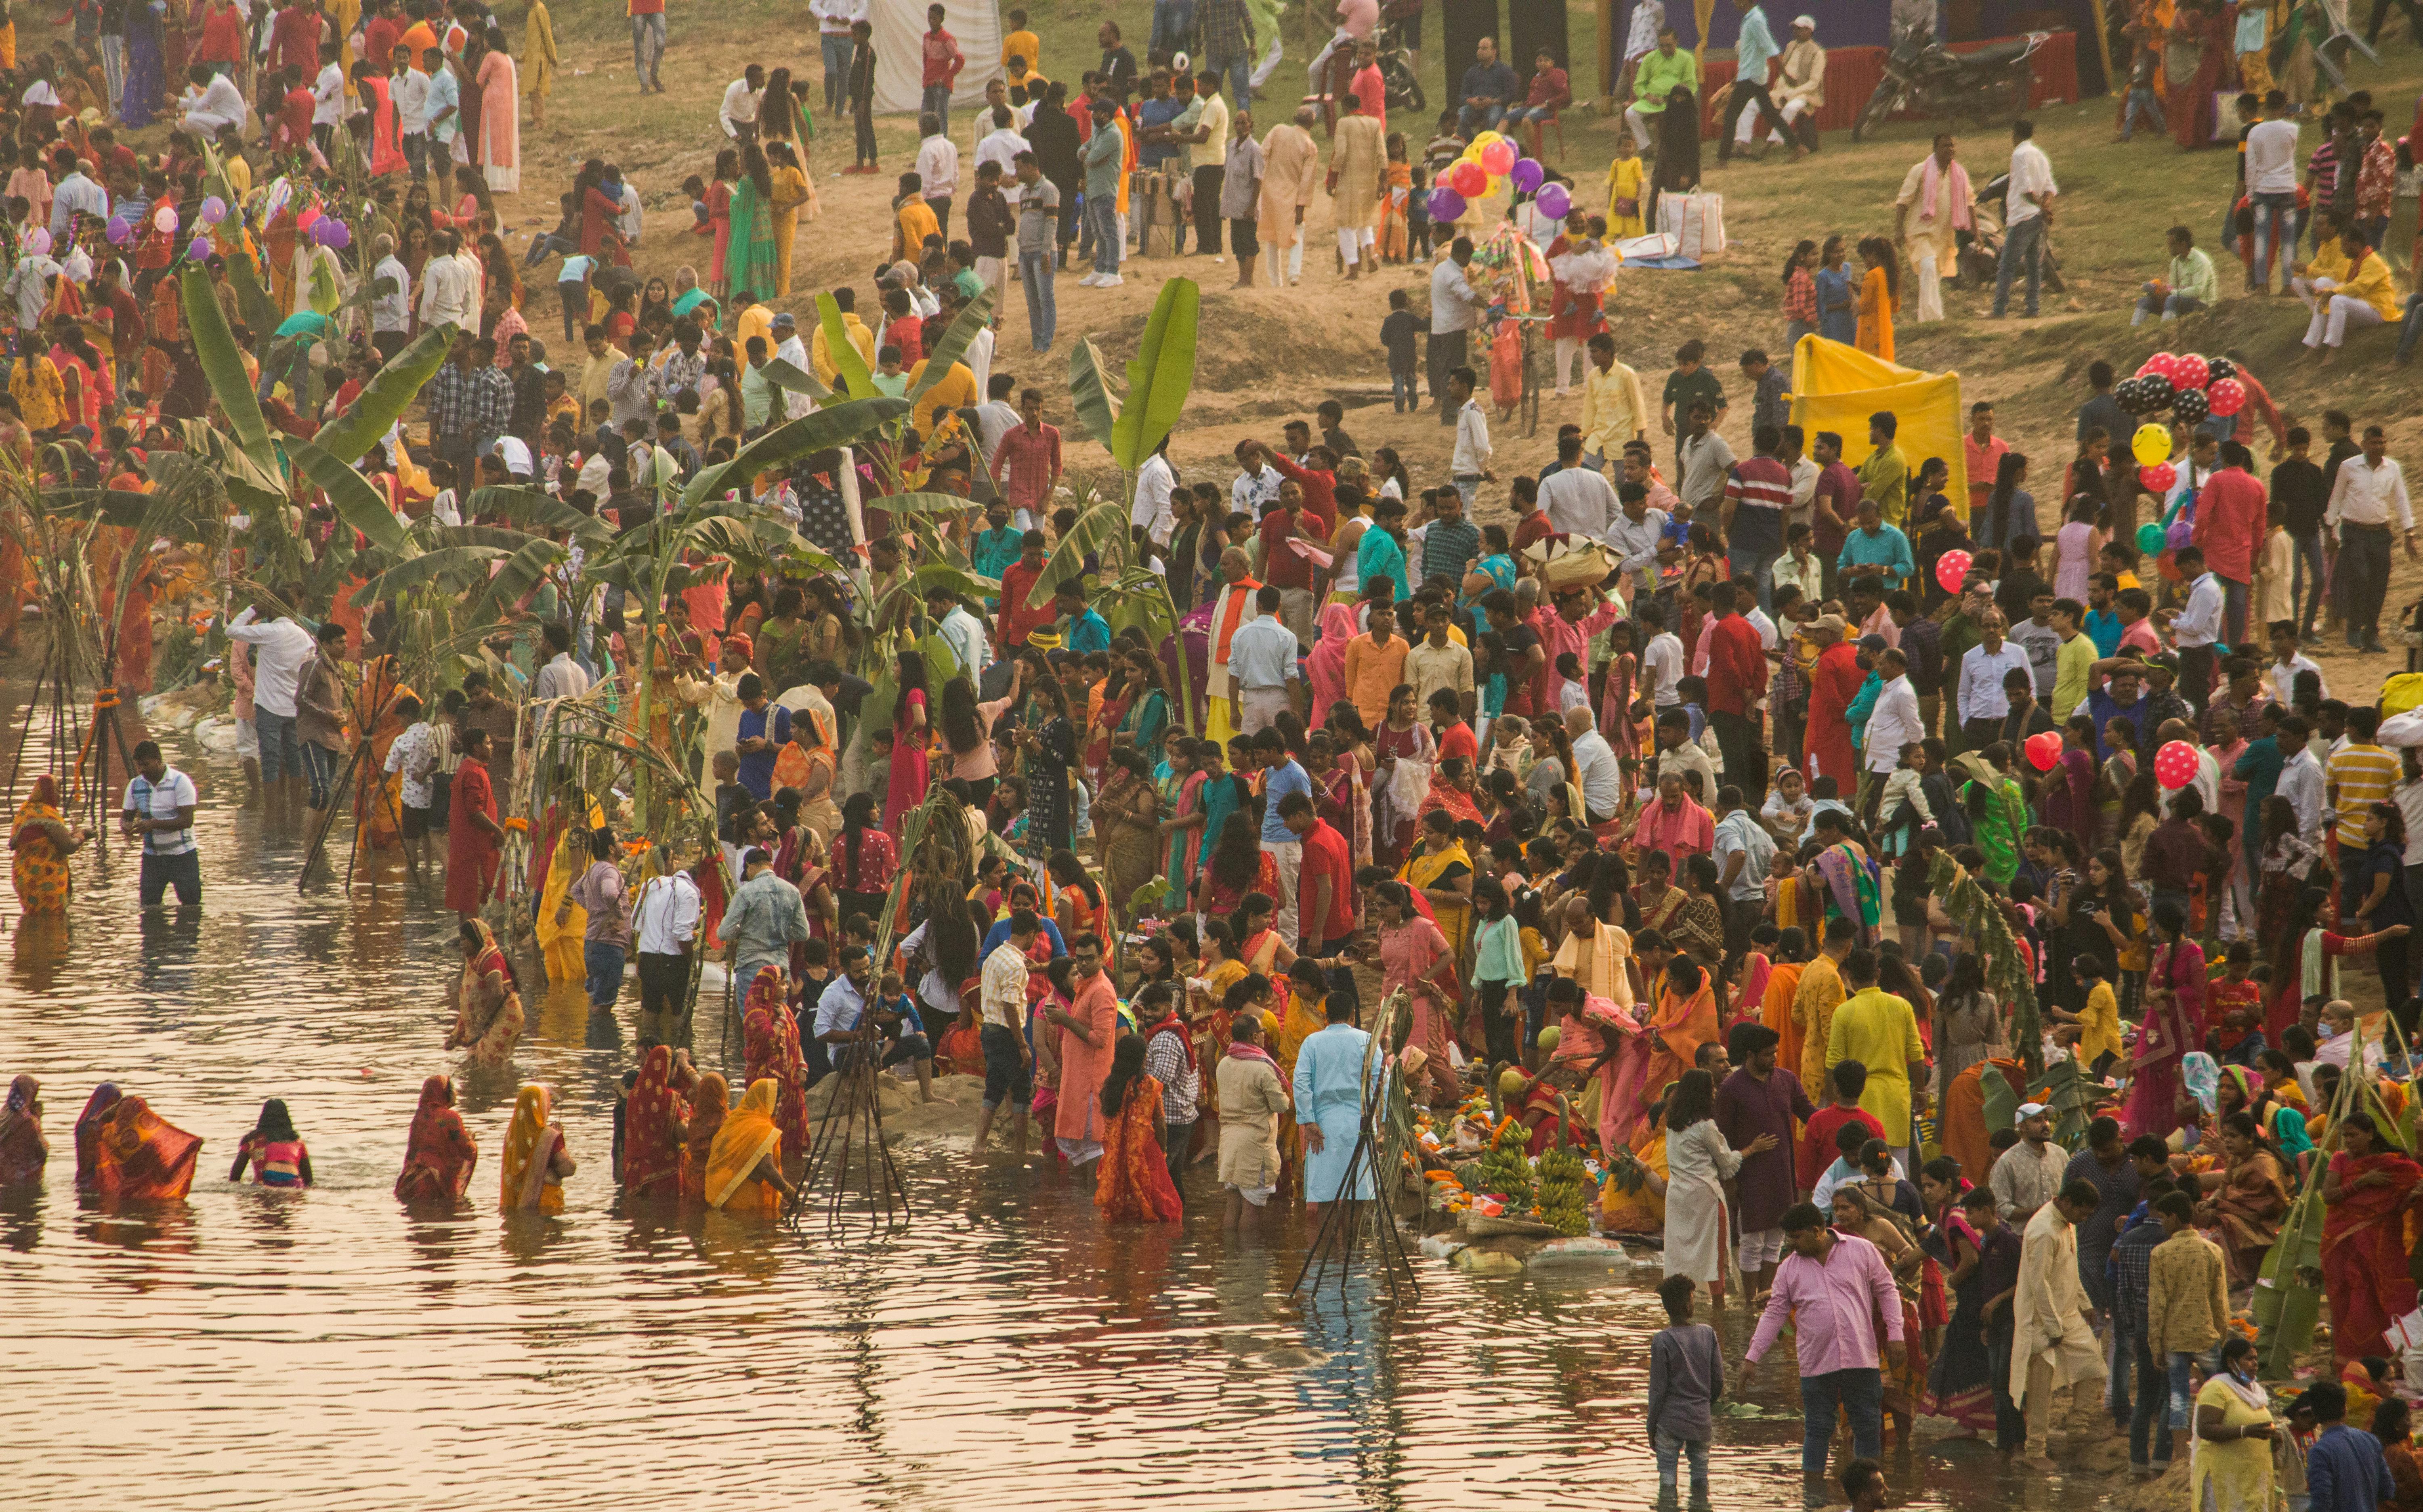 Celebration of chhath puja, worshipping of the sun. Chhath Puja is one of the most major festivals of India · Free Stock Photo